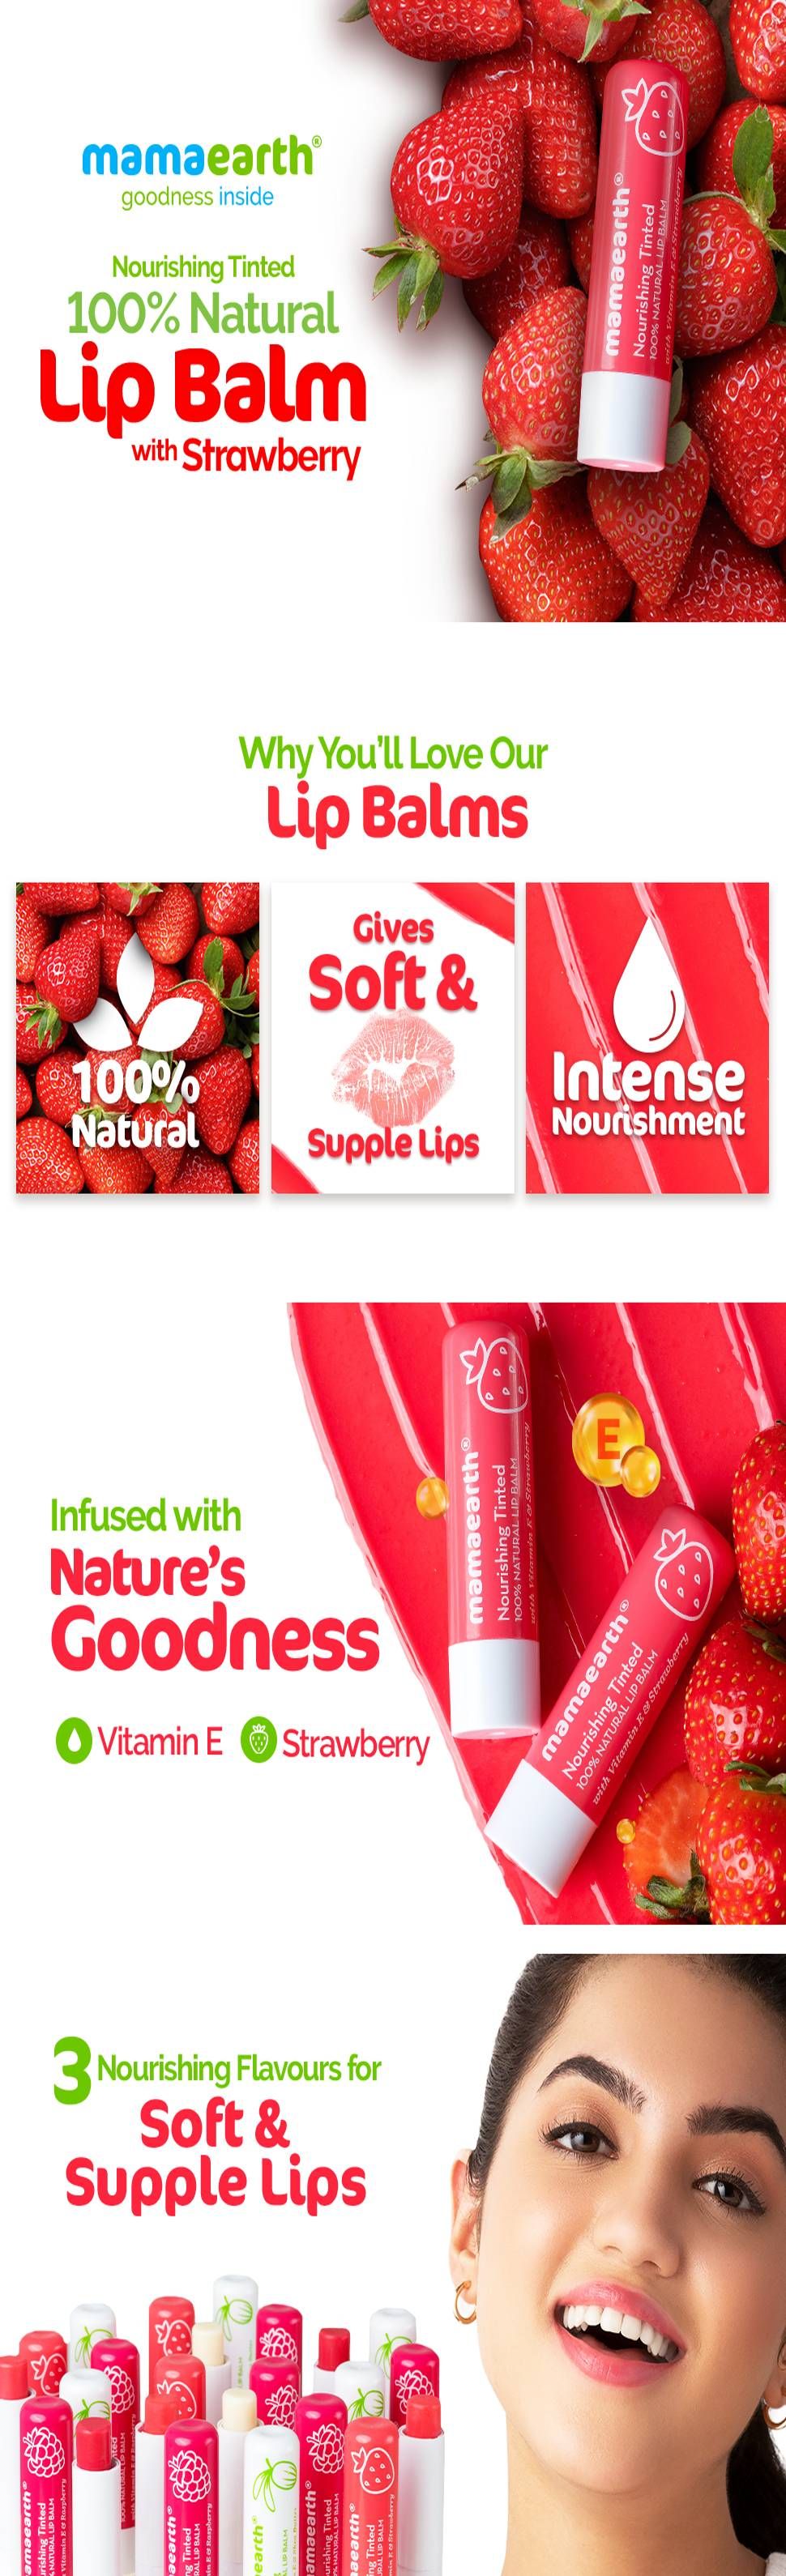 Nourishing Tinted 100% Natural Lip Balm with Vitamin E and Strawberry